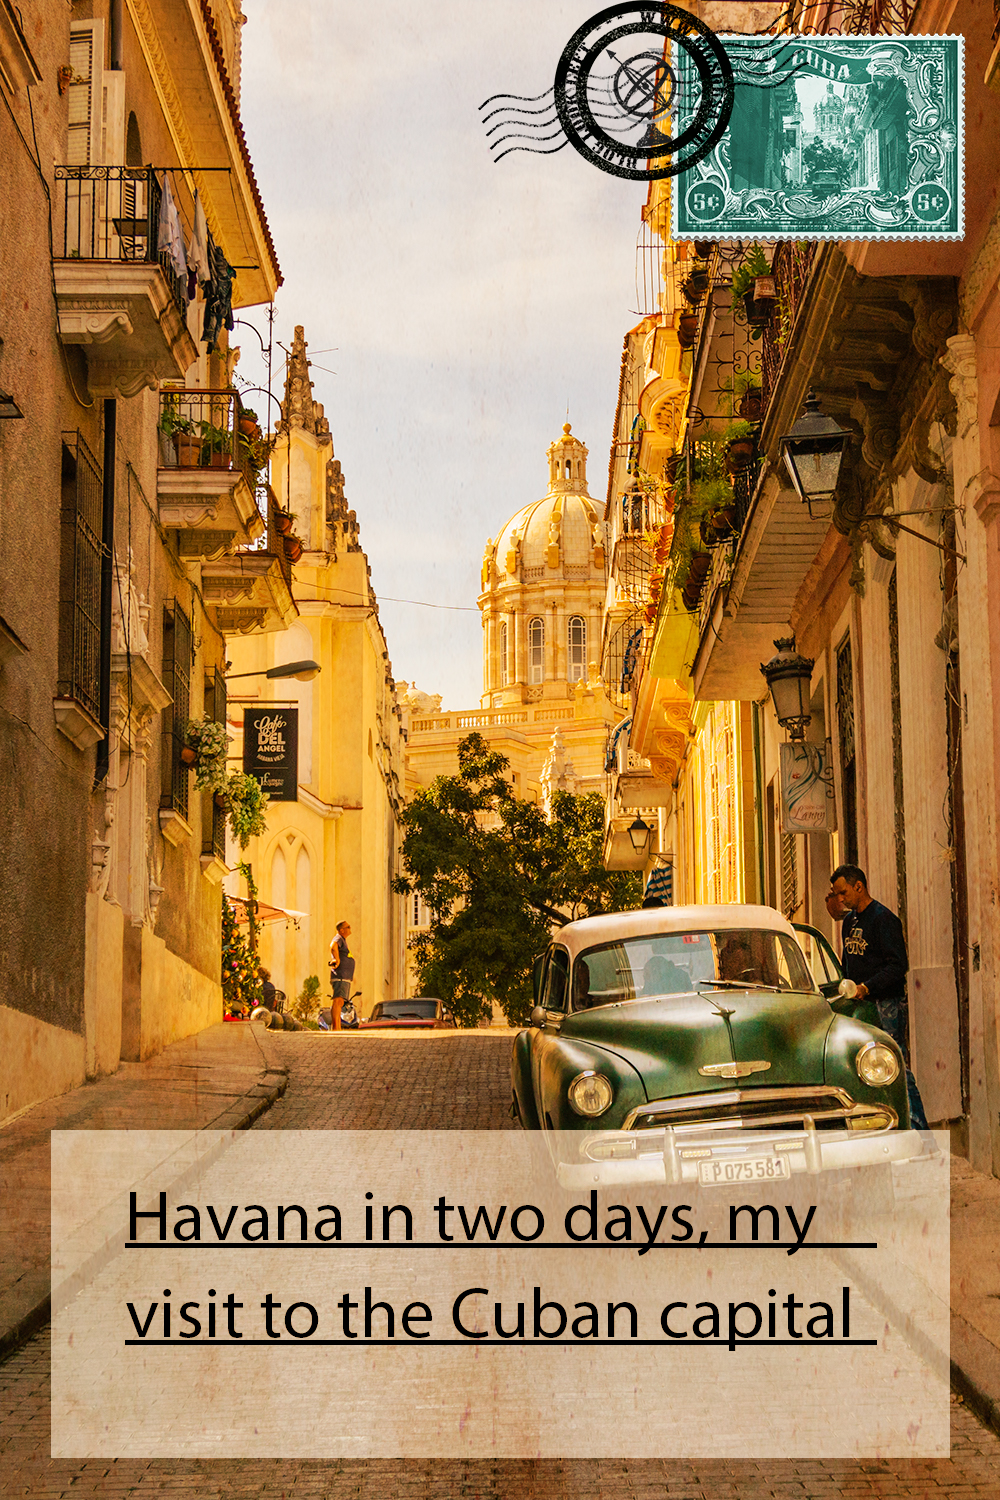 Havana in two days, my visit to the Cuban capital